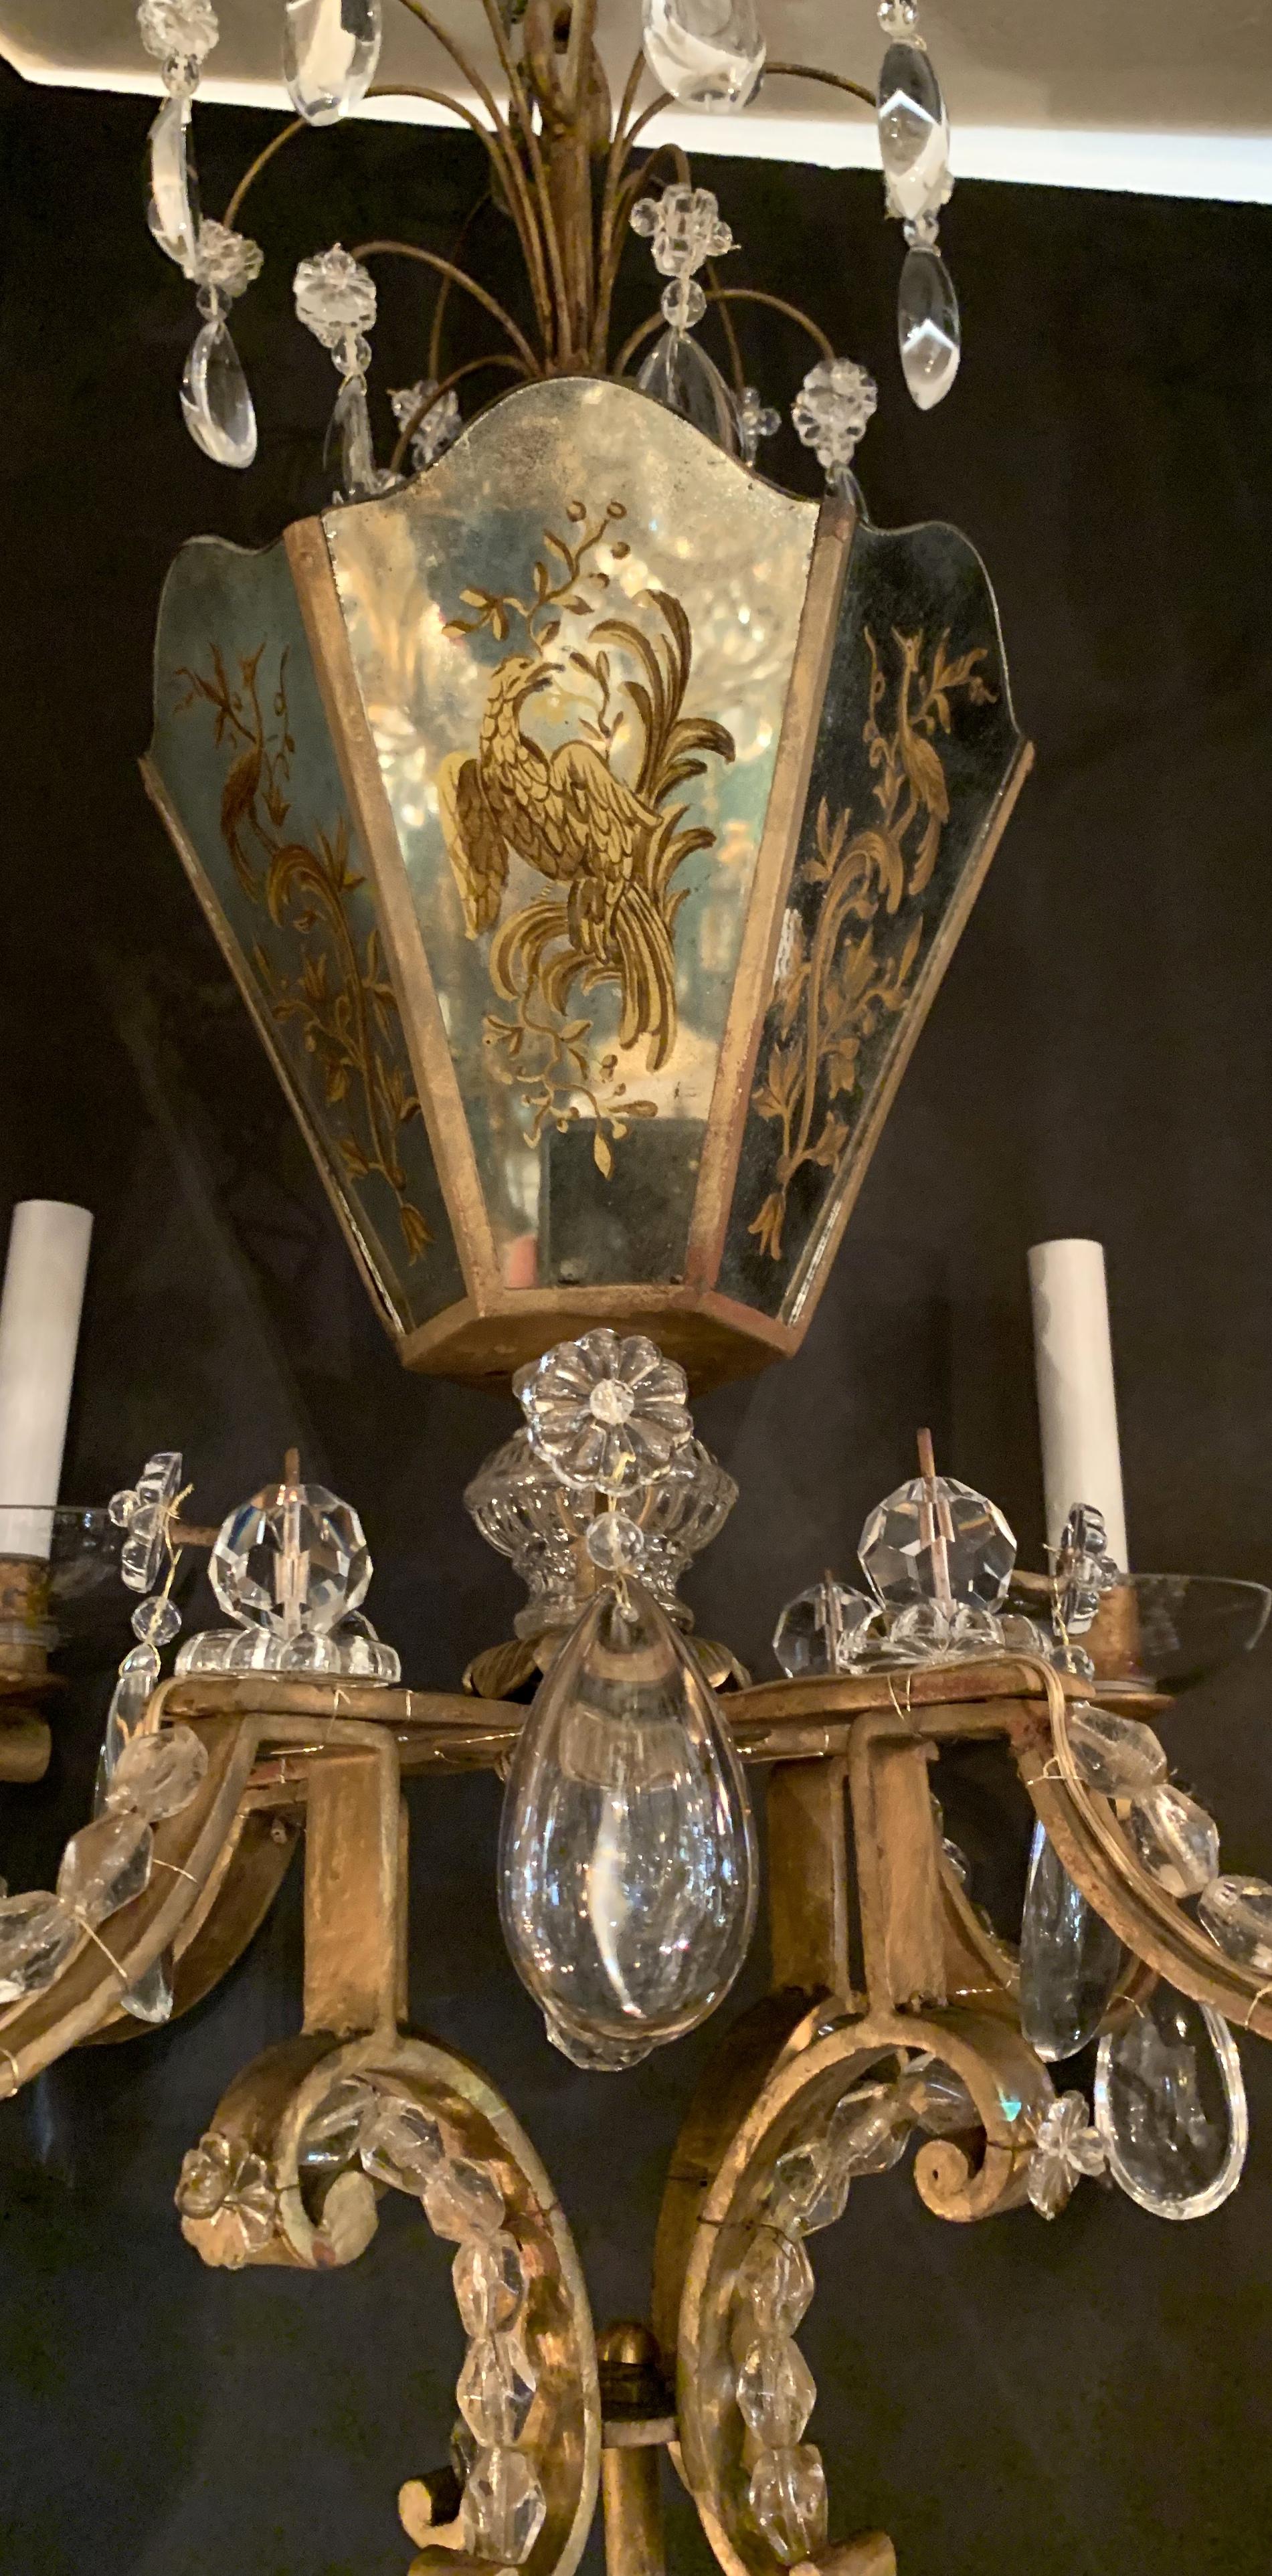 A wonderful French gold gilt chandelier in the manner of Baguès, from the iconic 1920s period. This stunning piece has 6 reverse painted mirrored panels forming a basket as the centerpiece and contains 3 candelabra lights within. From the centre